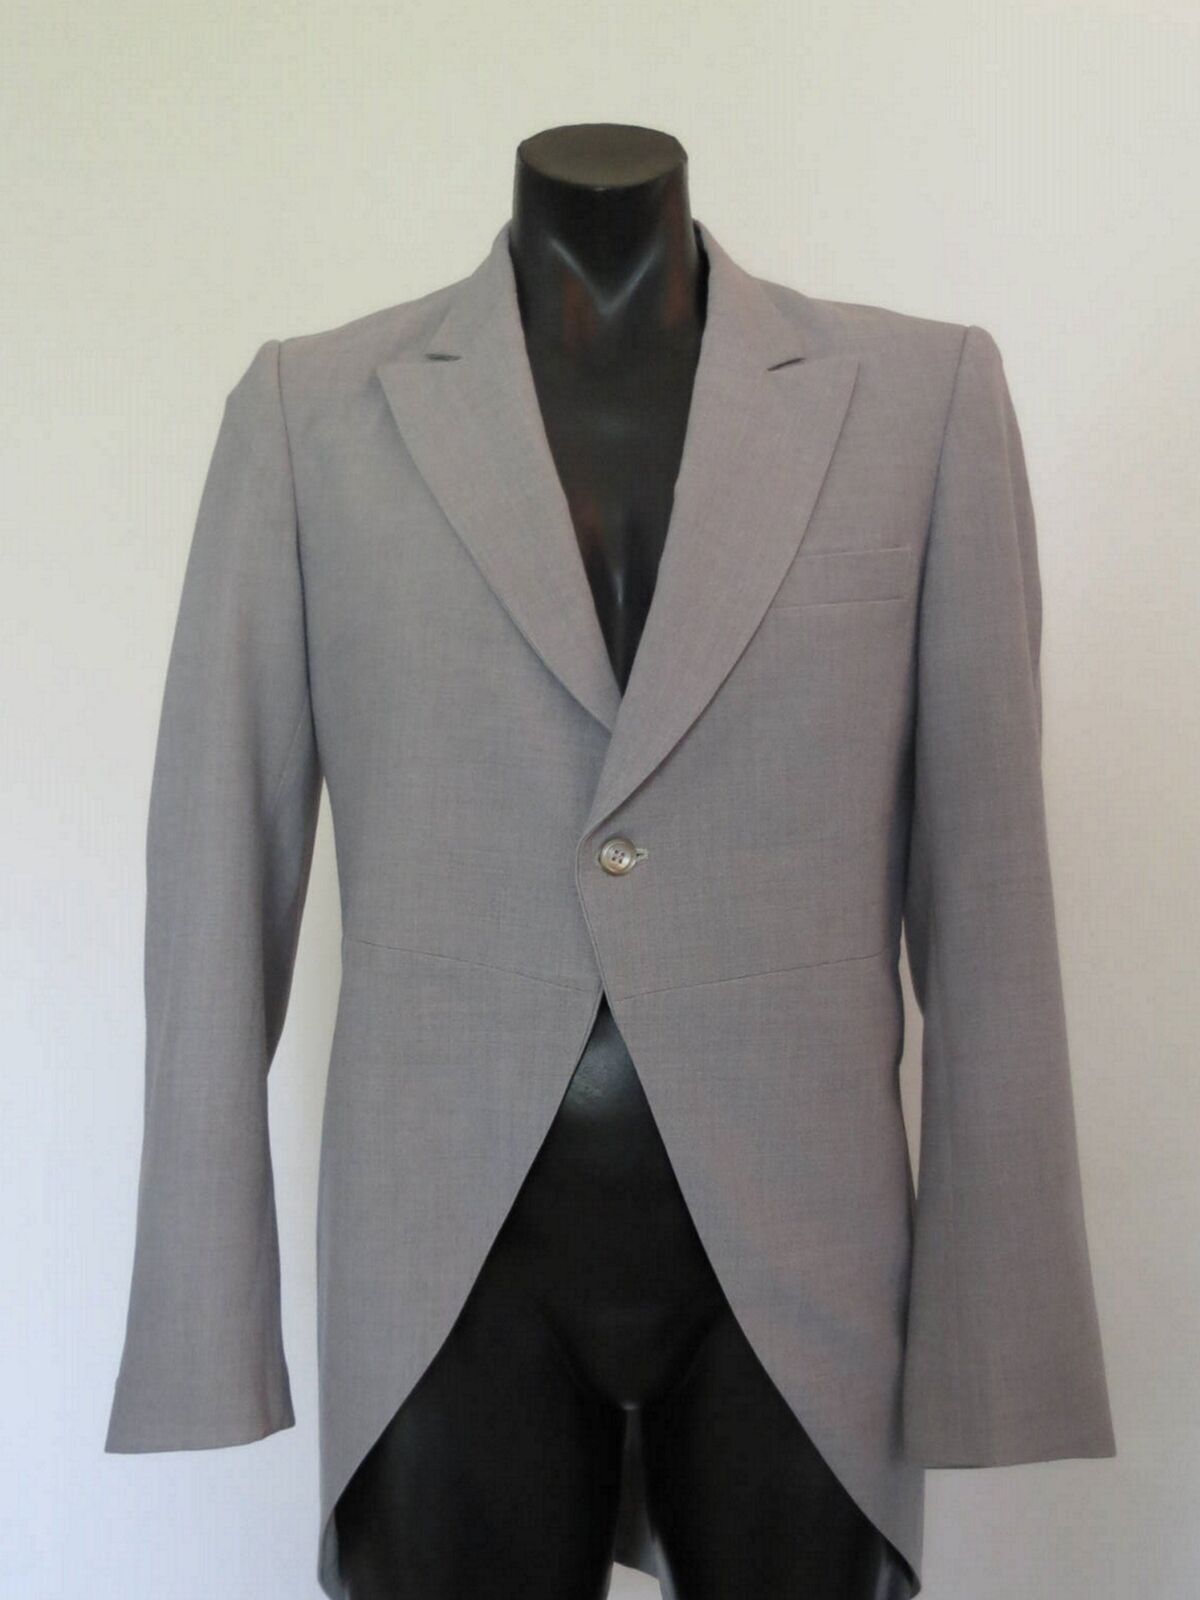 Size 3 - Grey Morning Coat, Tailcoat by Adelaide Tailoring - 1970s